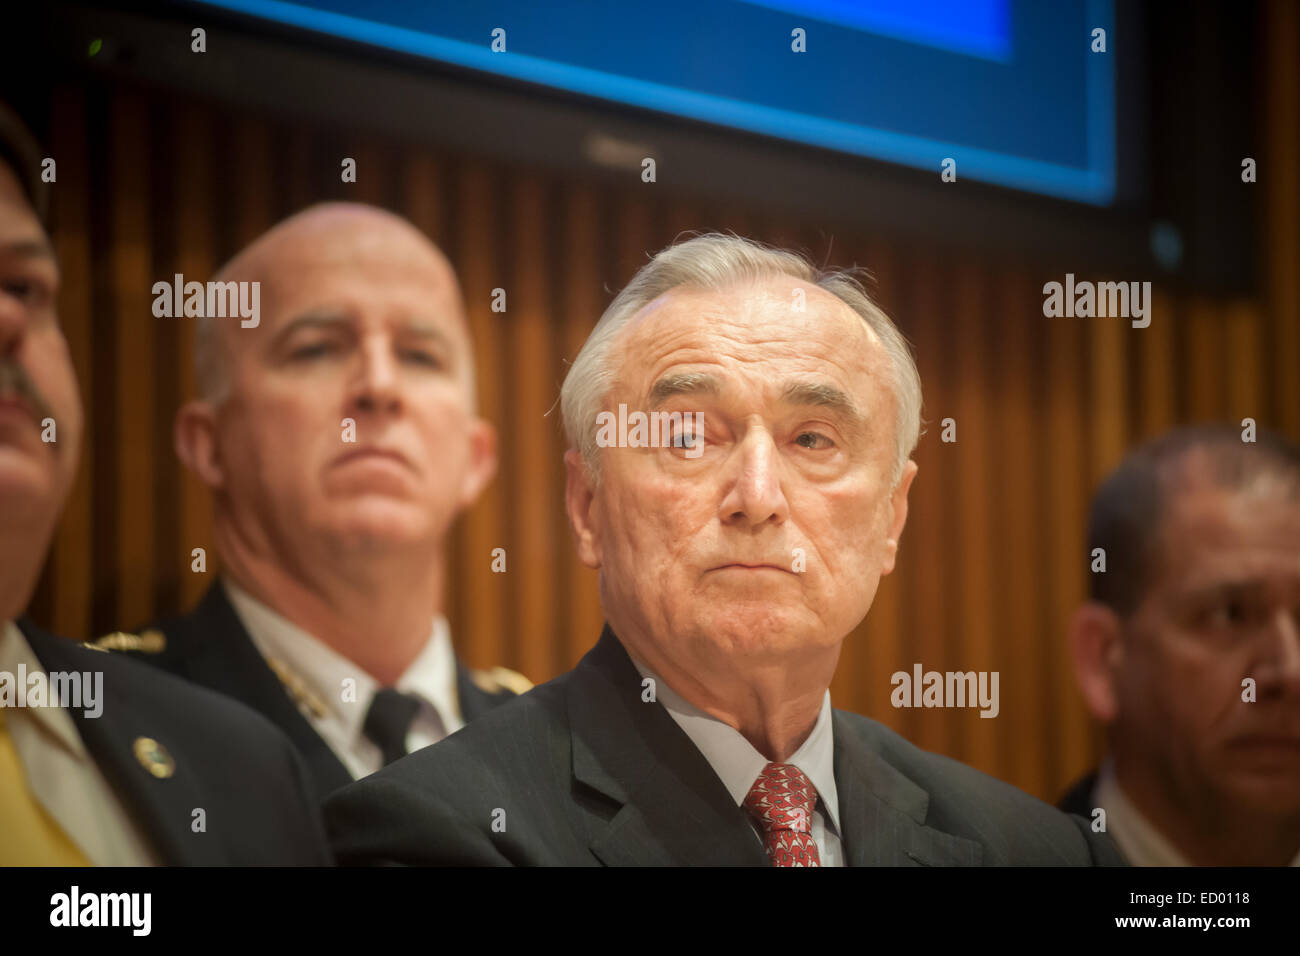 New York, NY, USA. 22nd Dec, 2014. NYPD Commissioner William Bratton at the media briefing in One Police Plaza about the ongoing investigation of the assassination of two NYPD officers, Wenjian Liu and Rafael Ramos by Ismaaiyl Brinsley.  The officers were murdered in Brooklyn in their squad car by Brinsley allegedly in retaliation for the Eric Garner death. Brinsley killed himself in the subway during his attempted escape. Credit:  Richard Levine/Alamy Live News Stock Photo